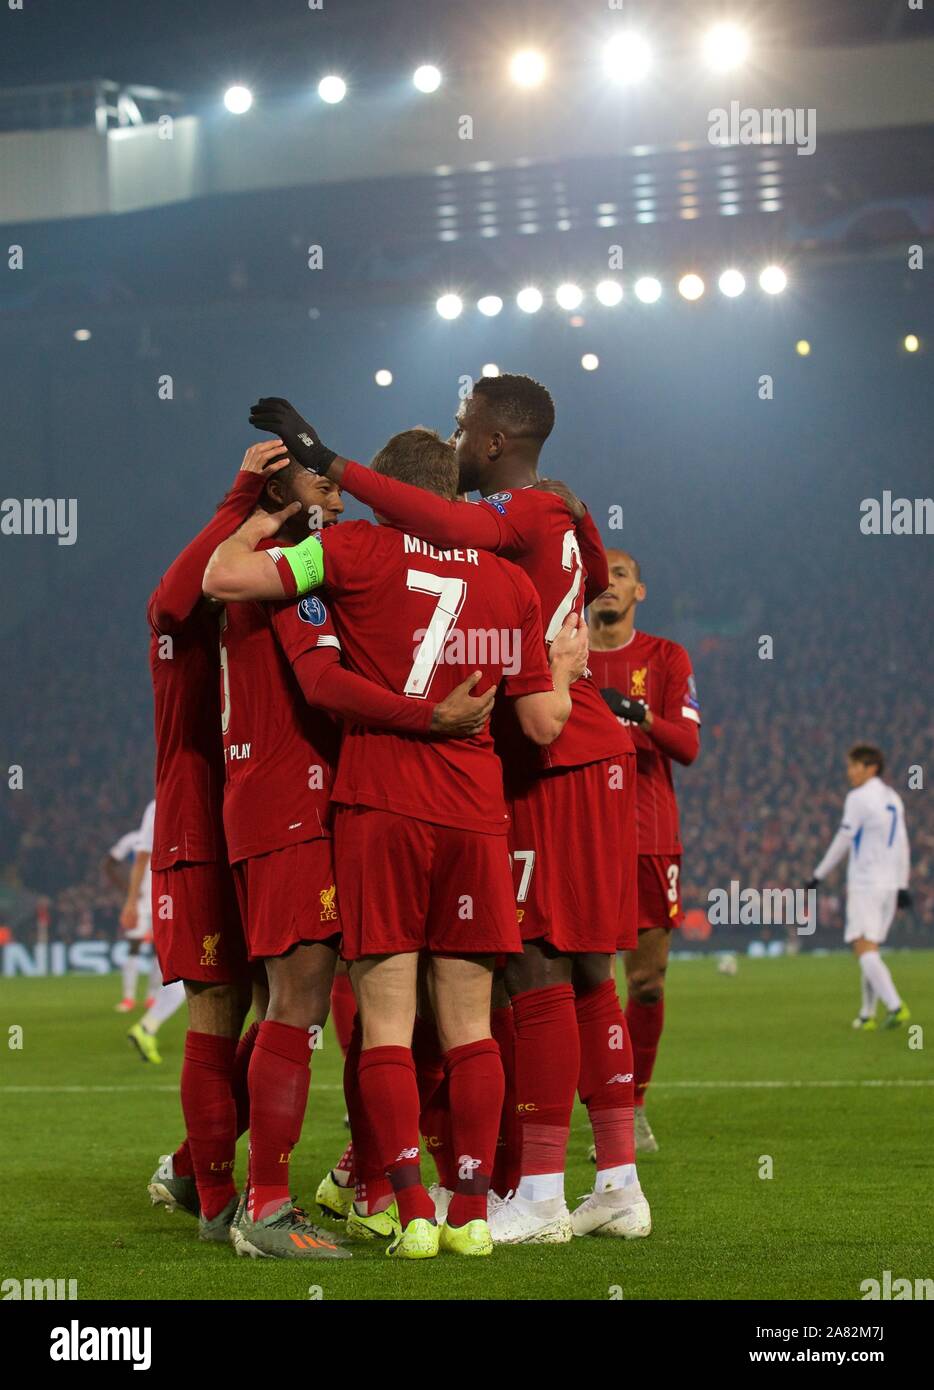 Liverpool. 6th Nov, 2019. Liverpool's players celebrate during the UEFA Champions League Group E match soccer between Liverpool FC and KRC Genk at Anfield in Liverpool, Britain on Nov. 5, 2019. Credit: Xinhua/Alamy Live News Stock Photo